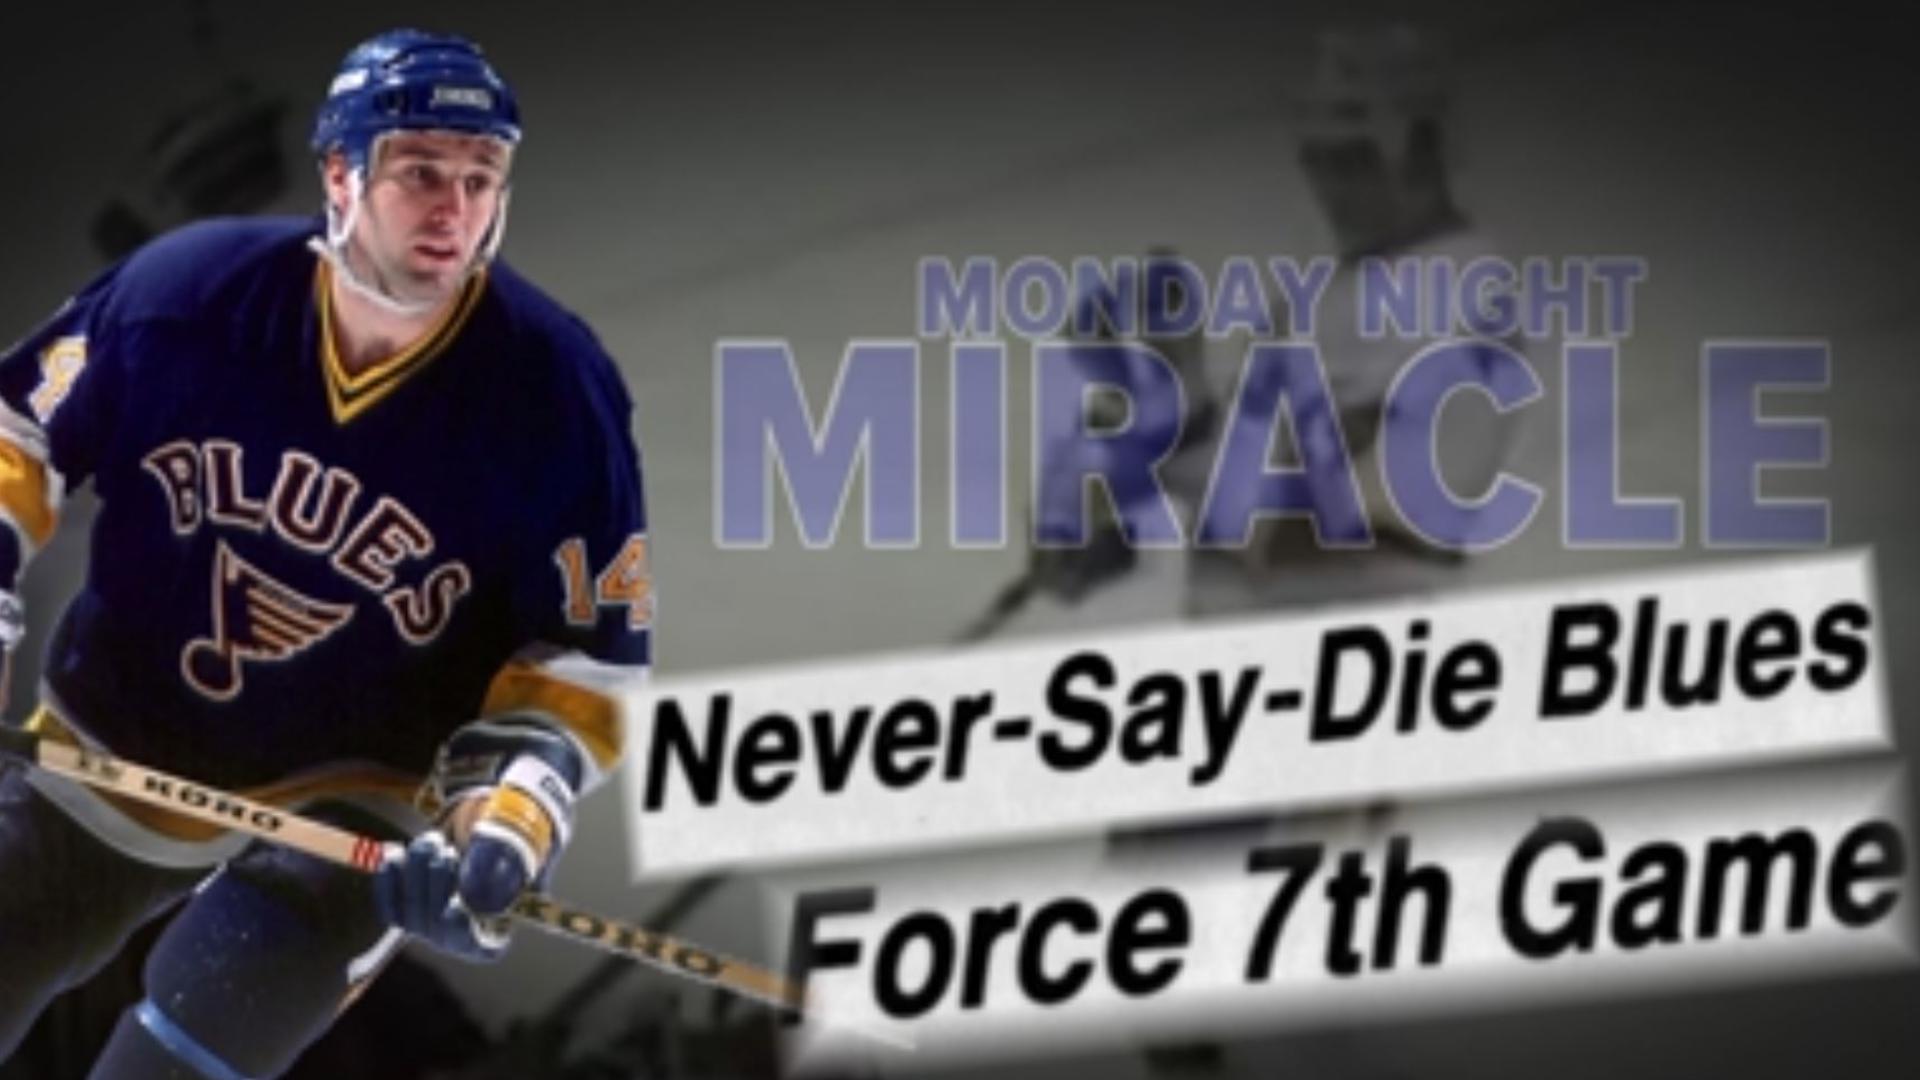 The Monday Night Miracle may not be the Blues impactful game ever. But it was a thrill ride that may never be topped in terms of drama and backstories.